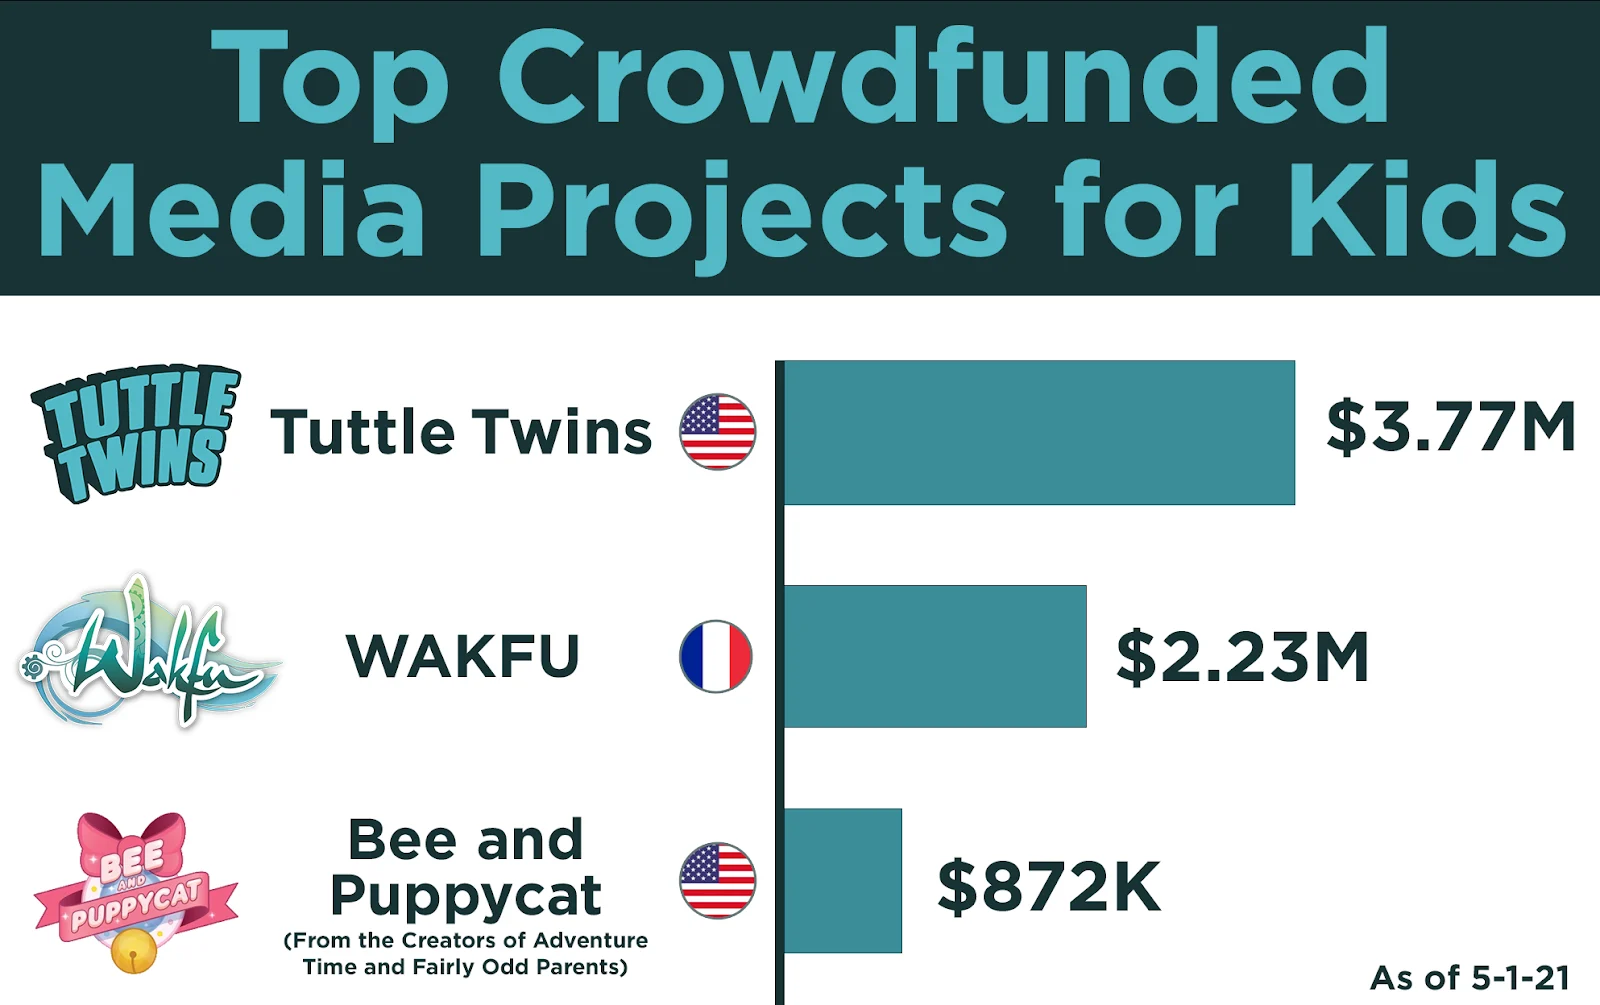 Top Crowdfunded